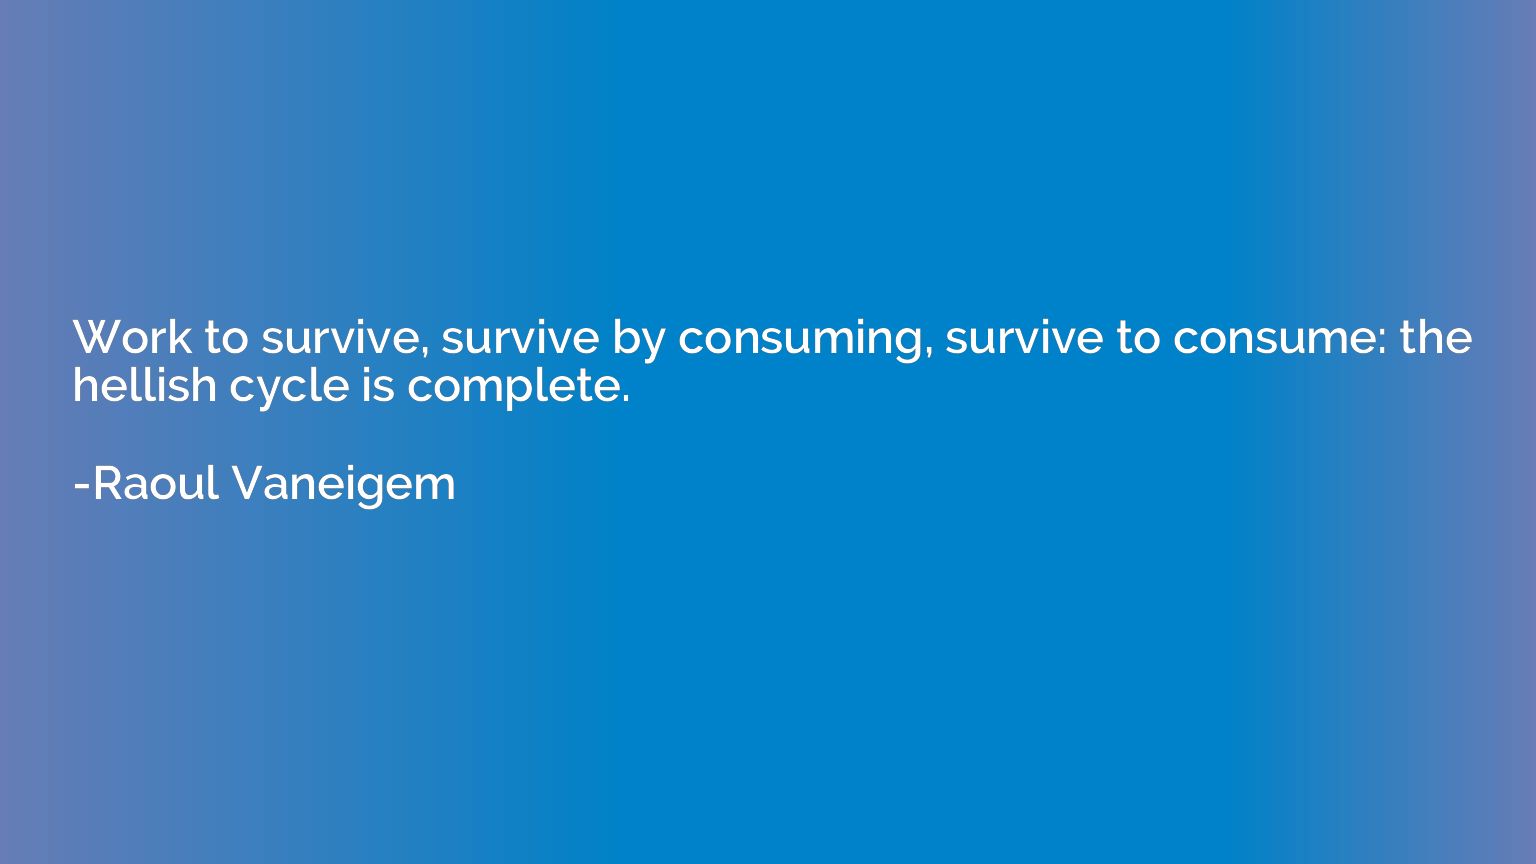 Work to survive, survive by consuming, survive to consume: t